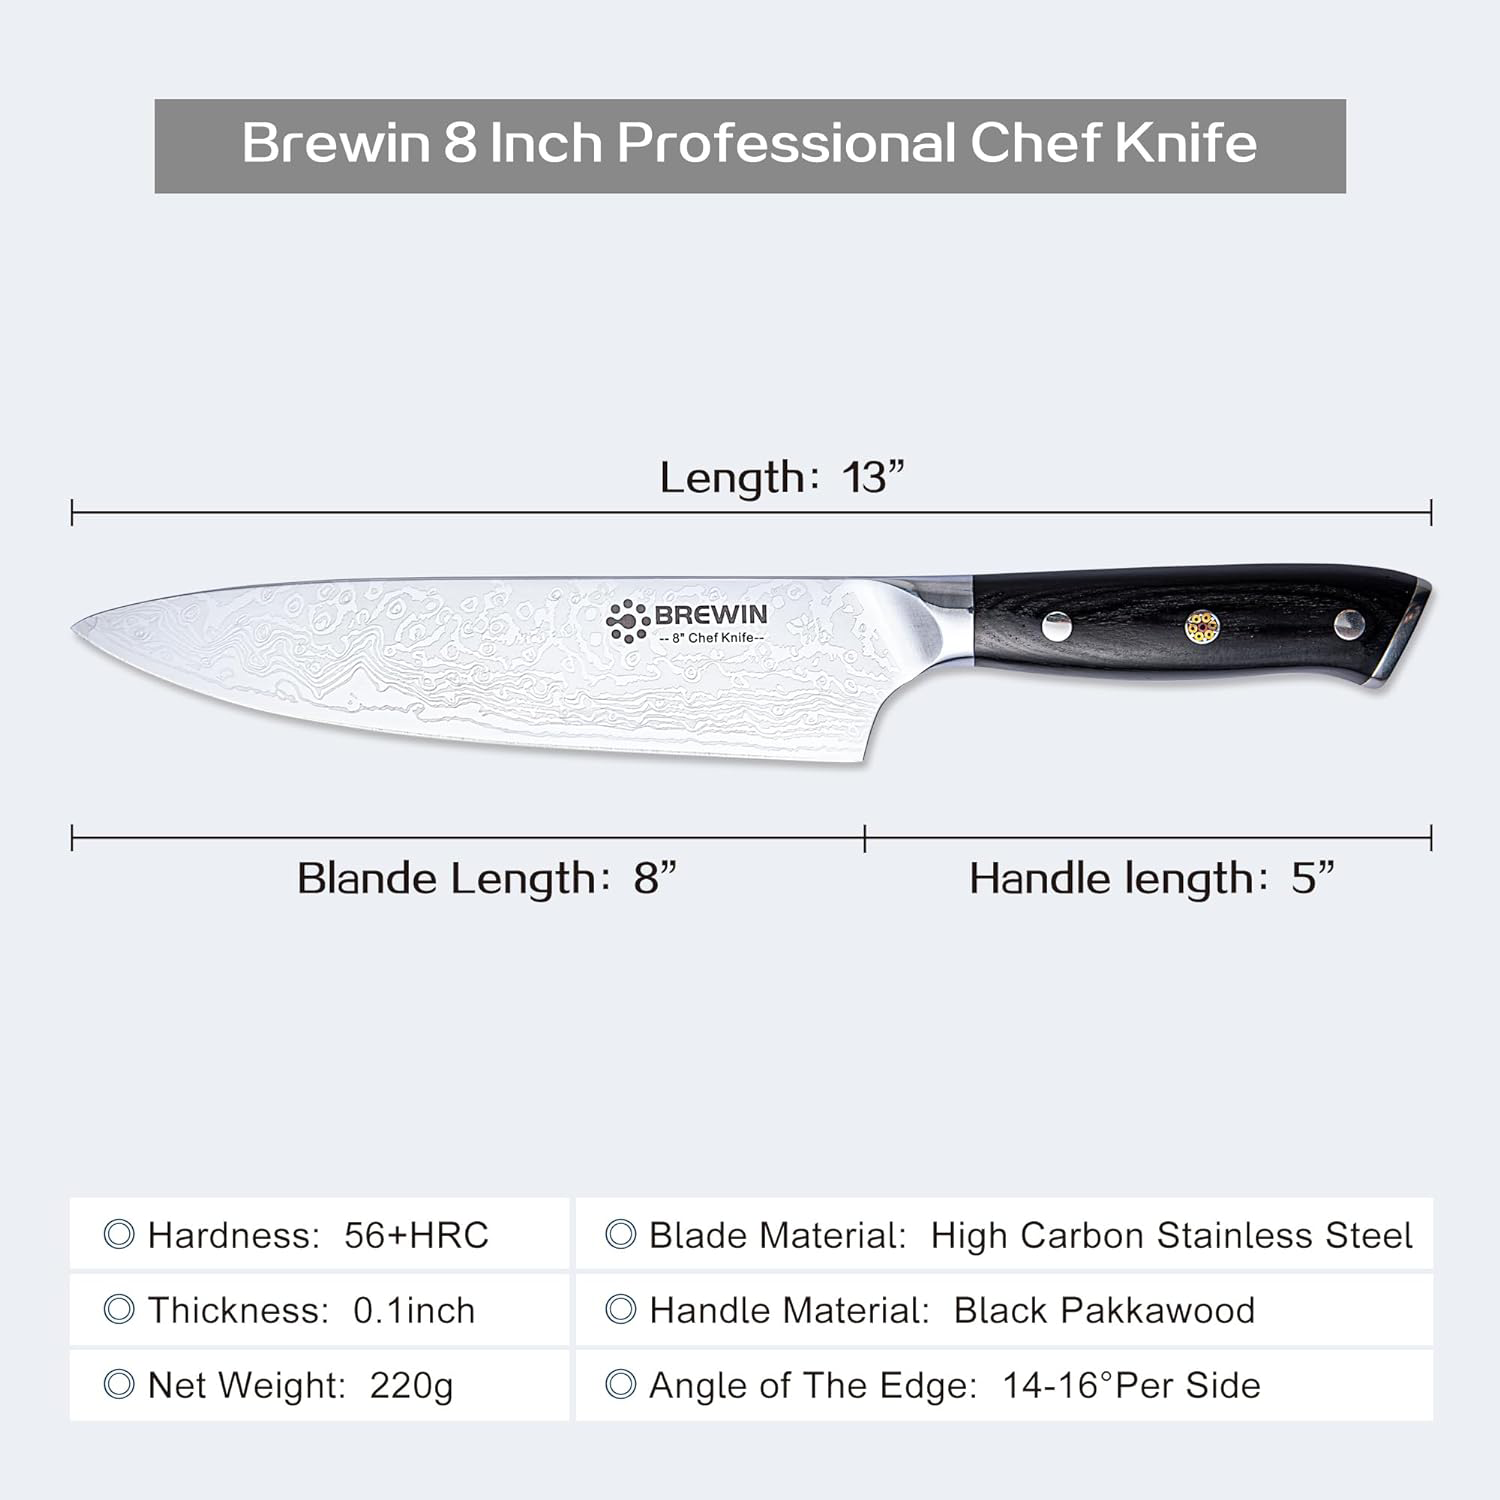 3-Piece Brewin Professional High Carbon Stainless Steel Chef Knife